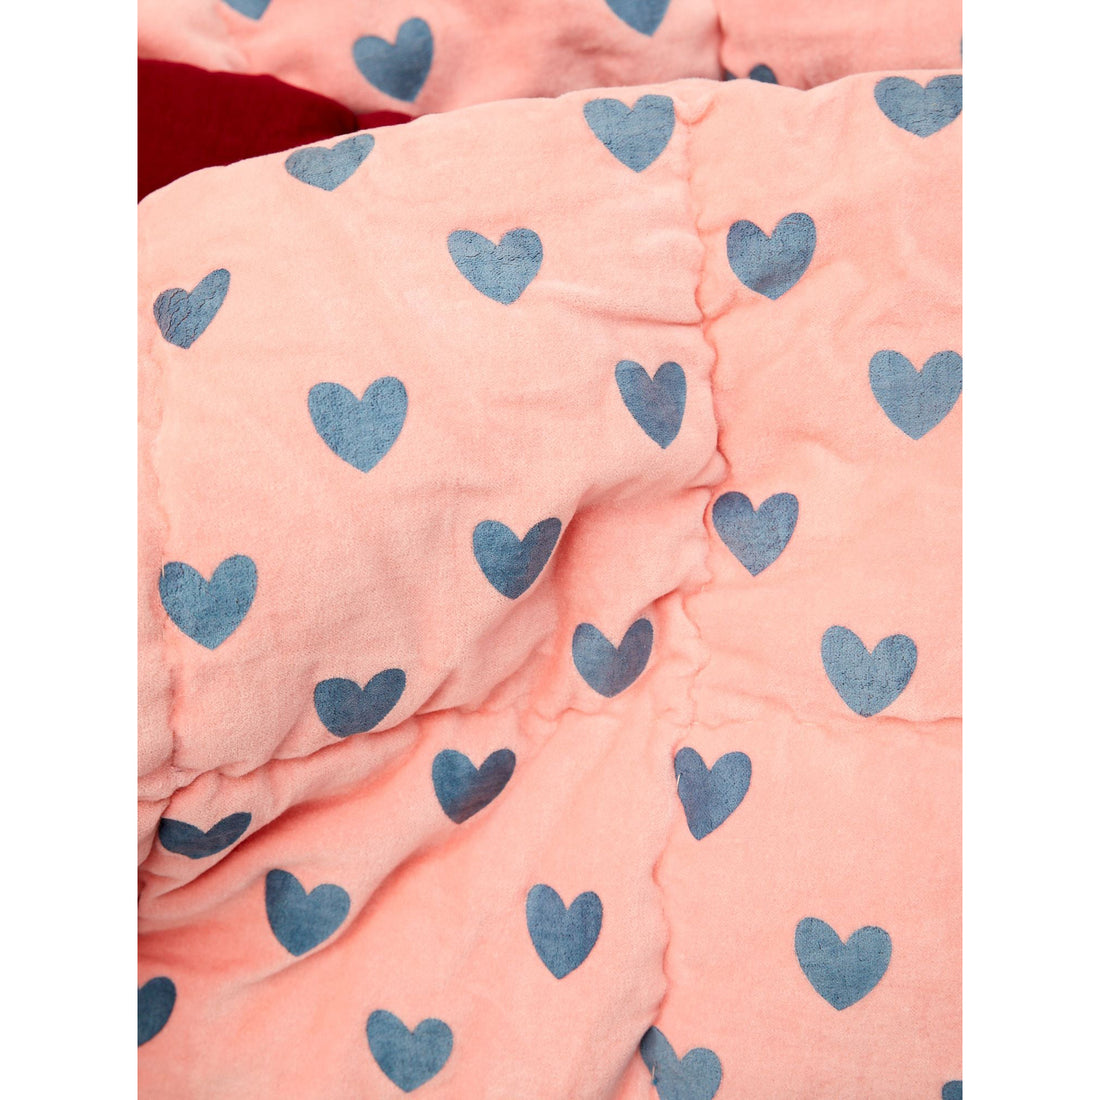 rice-dk-velvet-quilt-with-hearts-in-pink-and-gendarme-blue-assorted-rice-blvel-heai- (4)